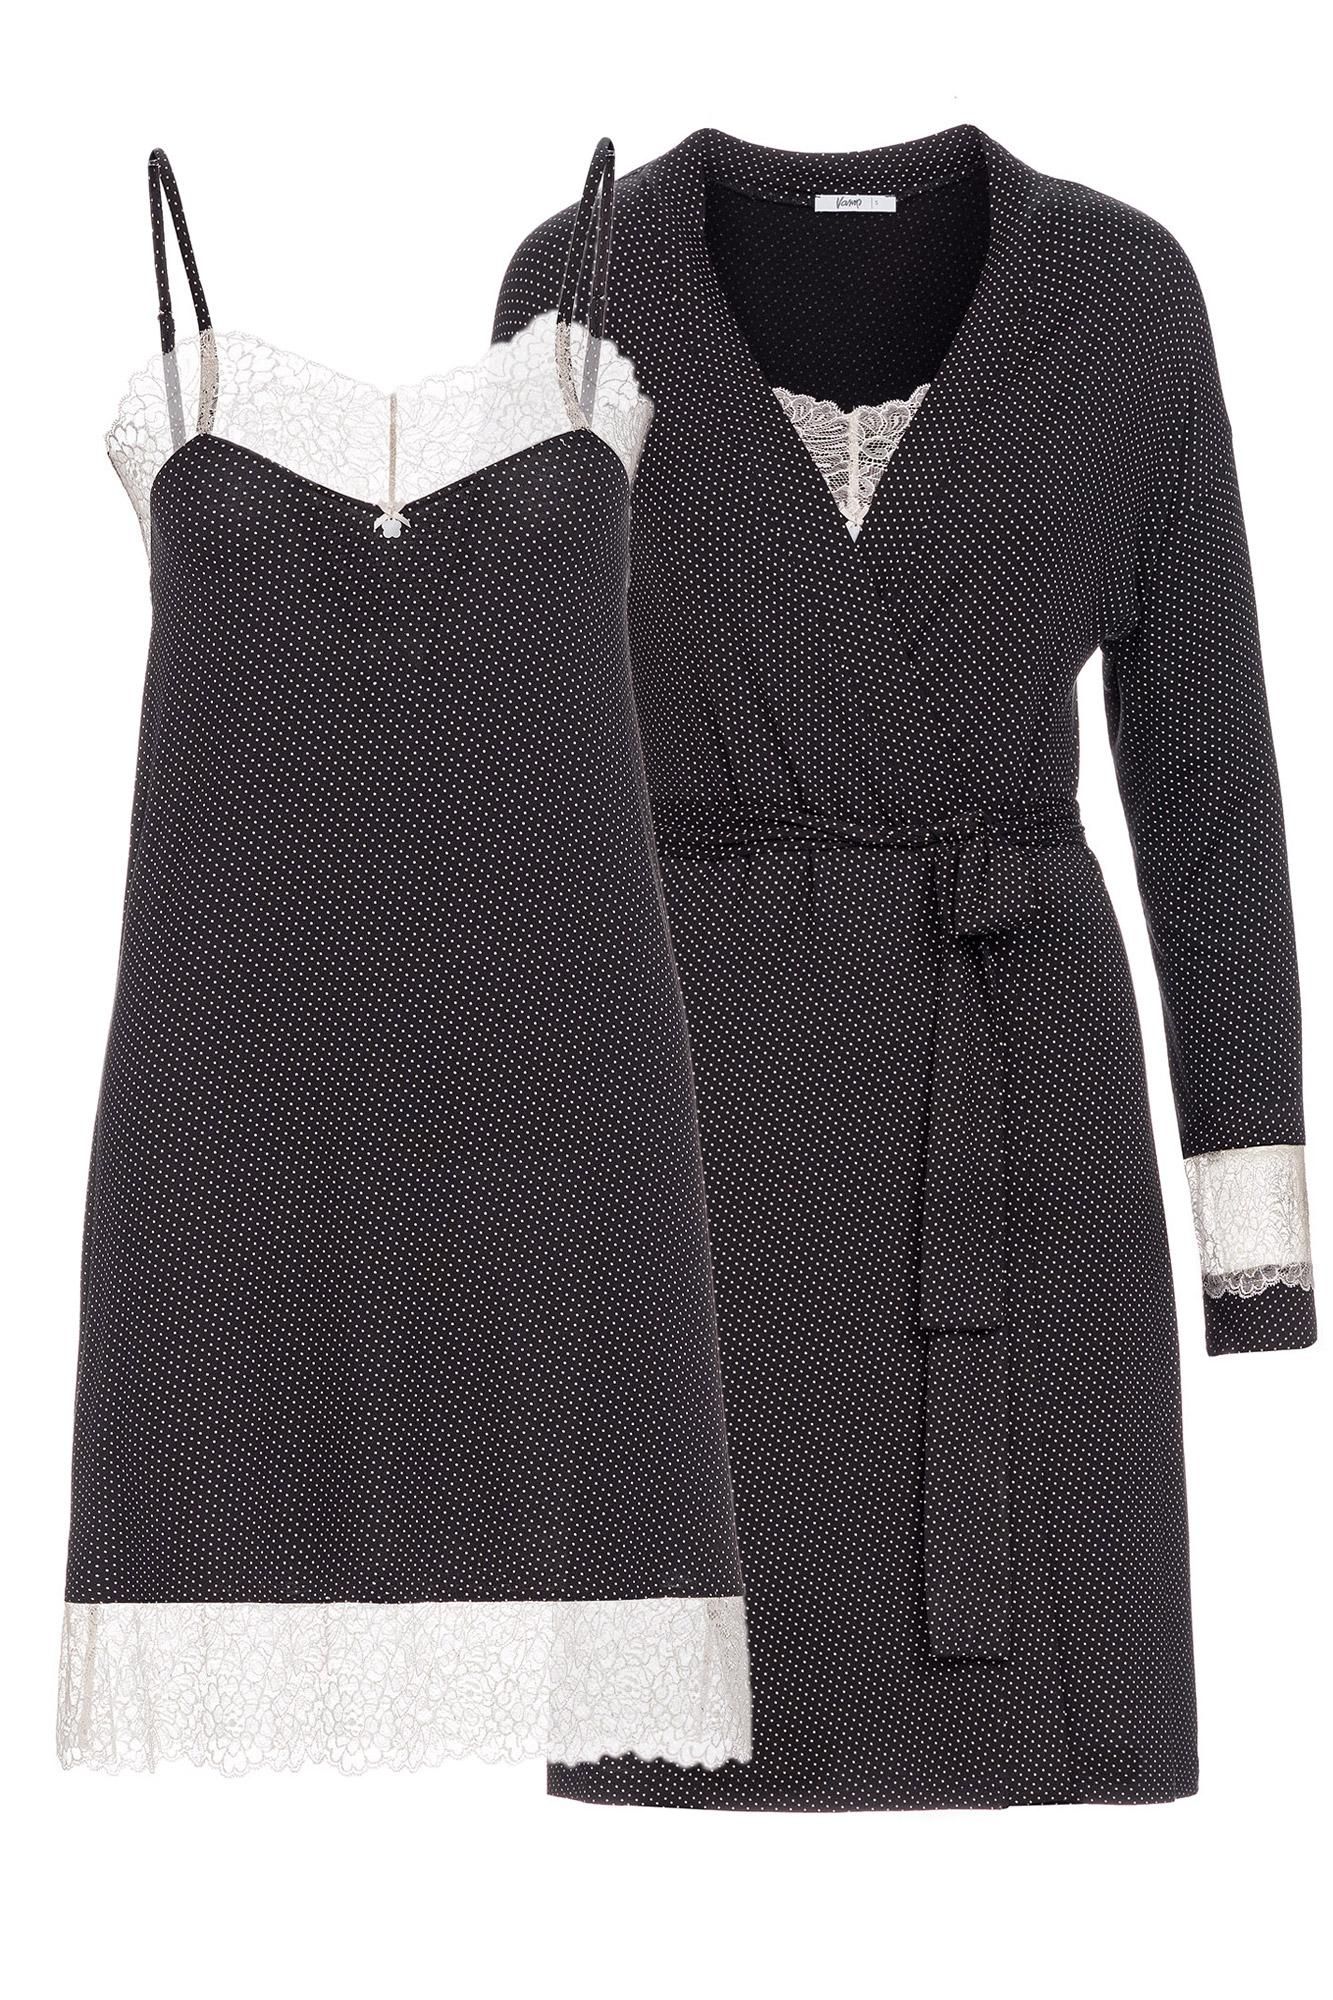 Women’s Nightgown and Robe